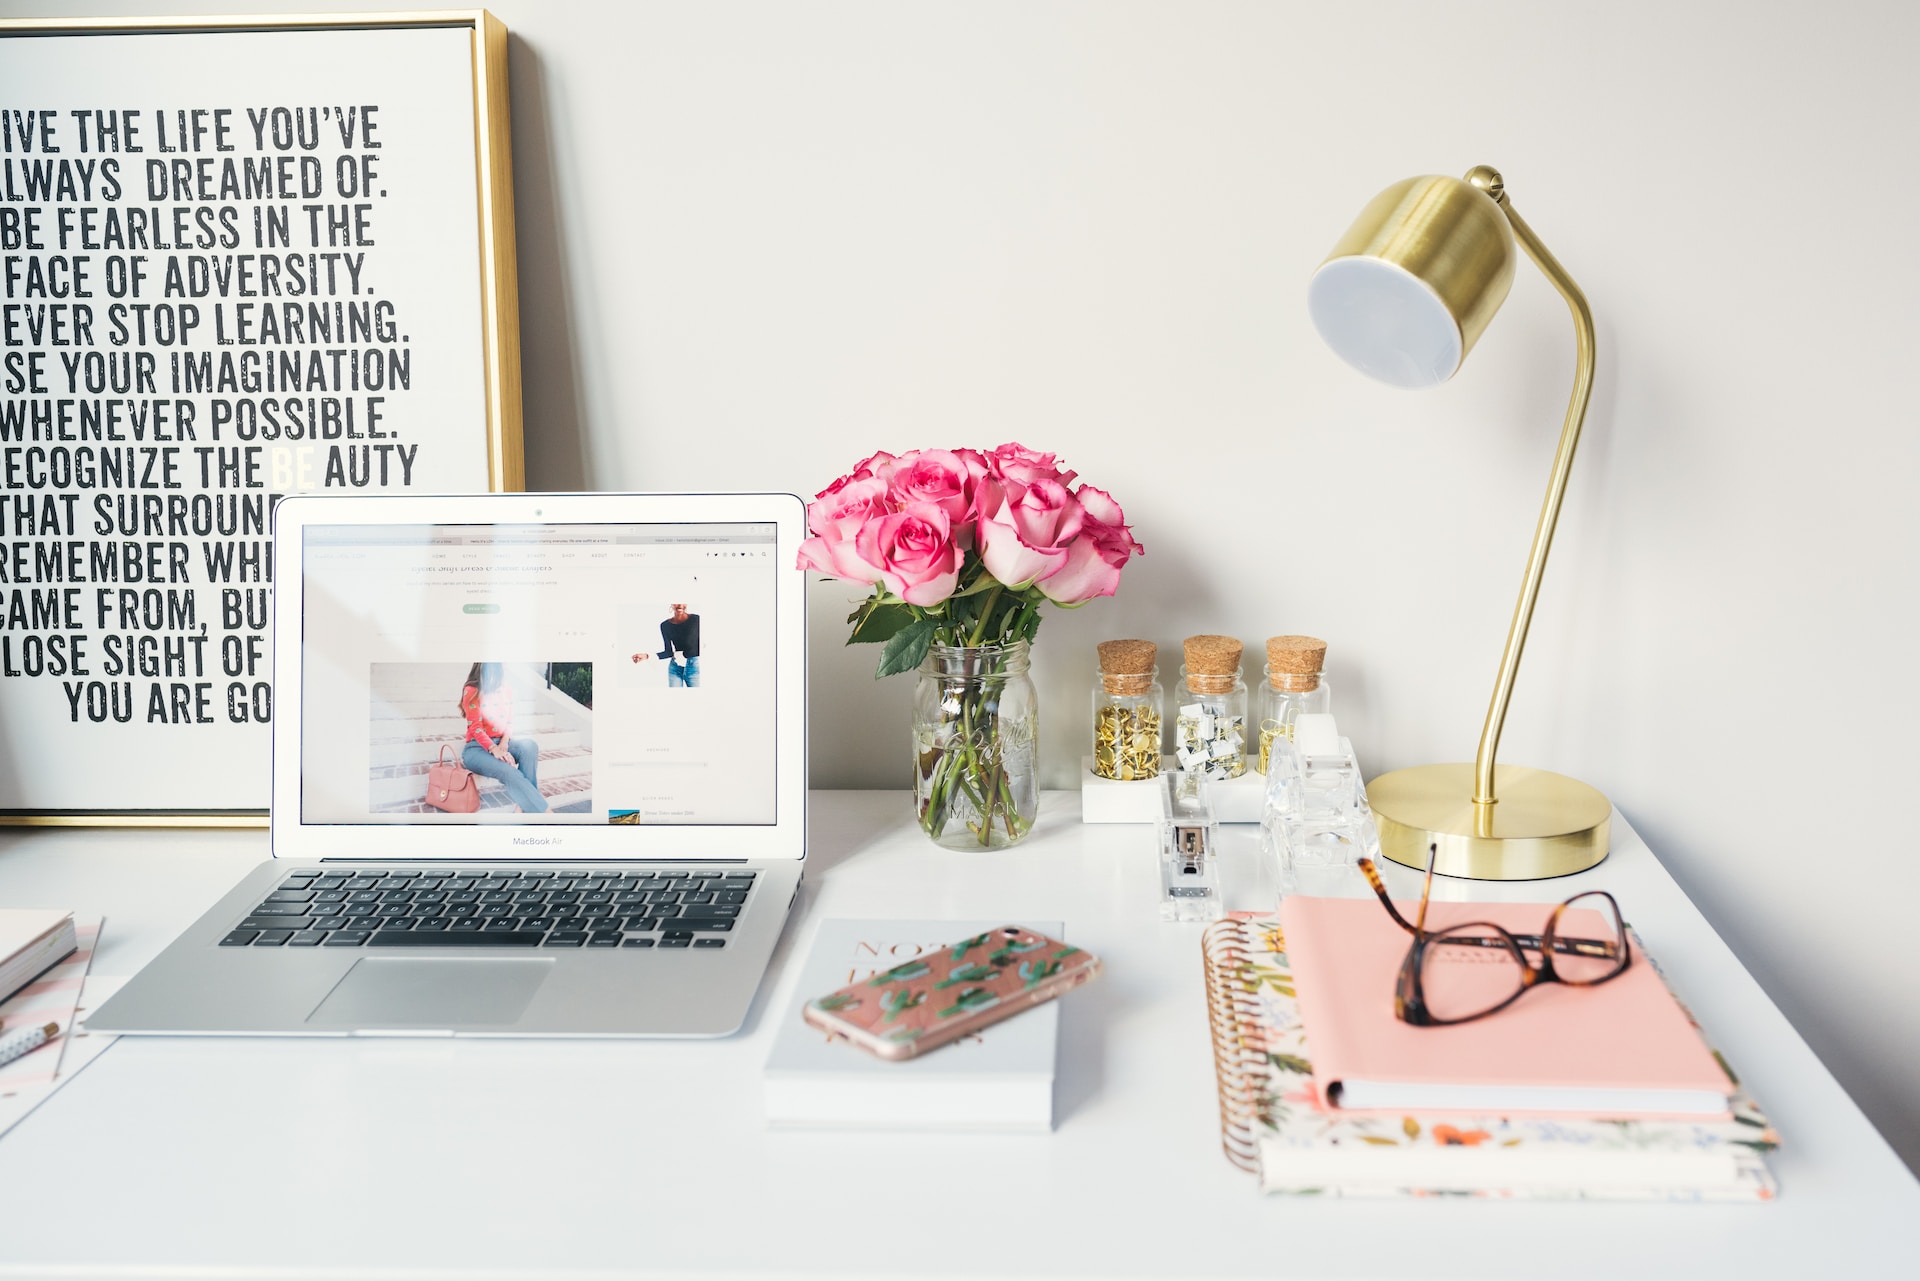 Laptop with motivational poster, flowers, lamp and office supplies